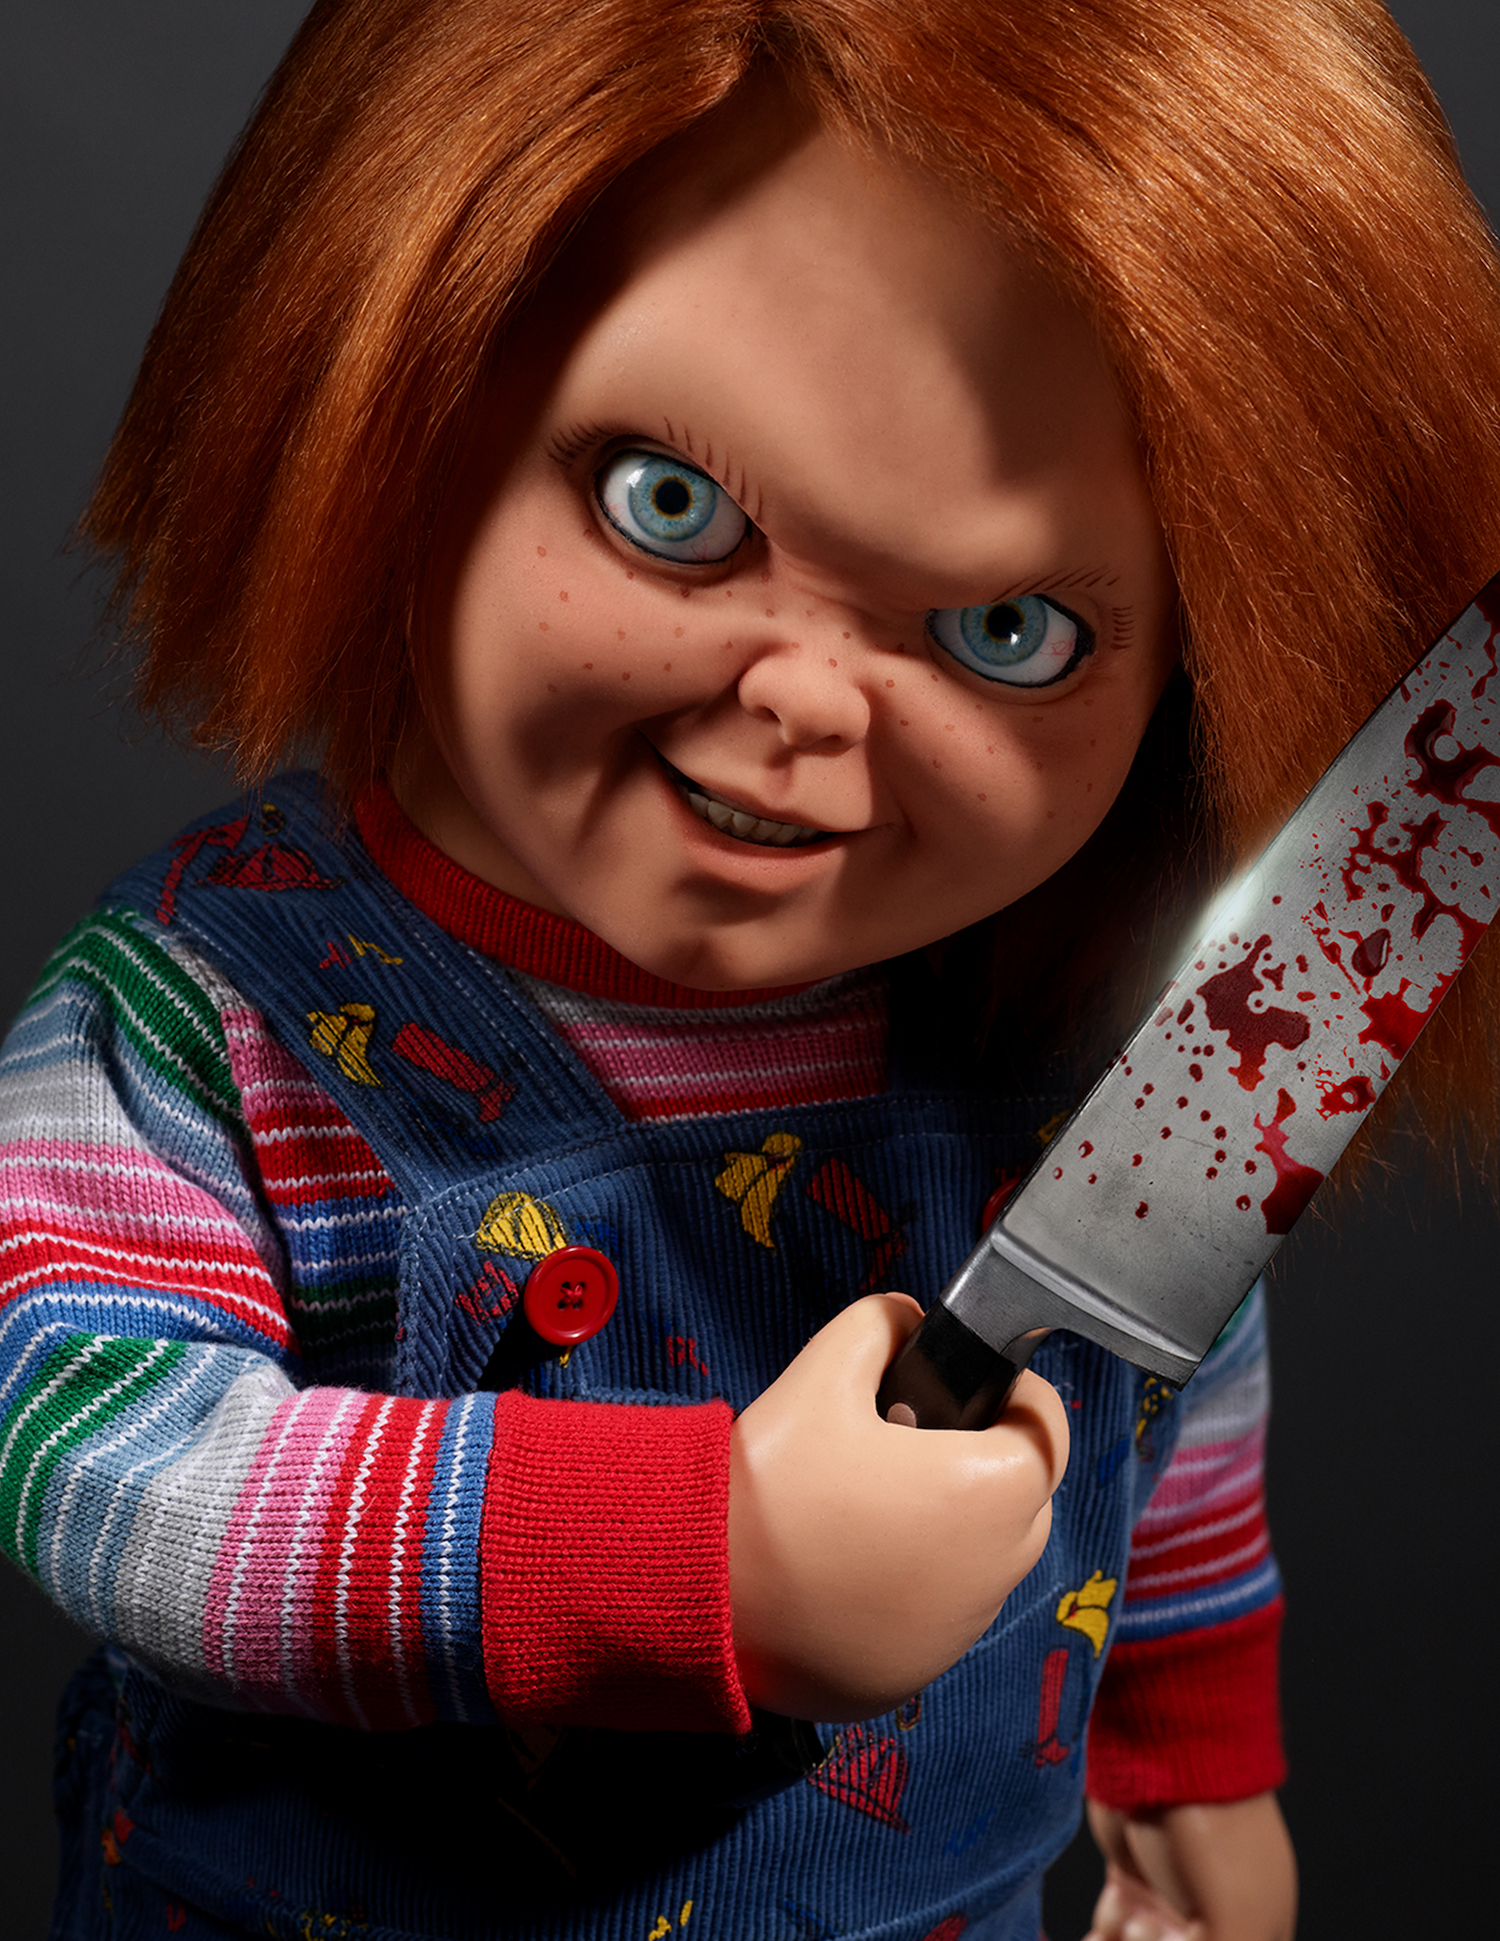 Child's Play killer doll Chucky holds a bloody knife